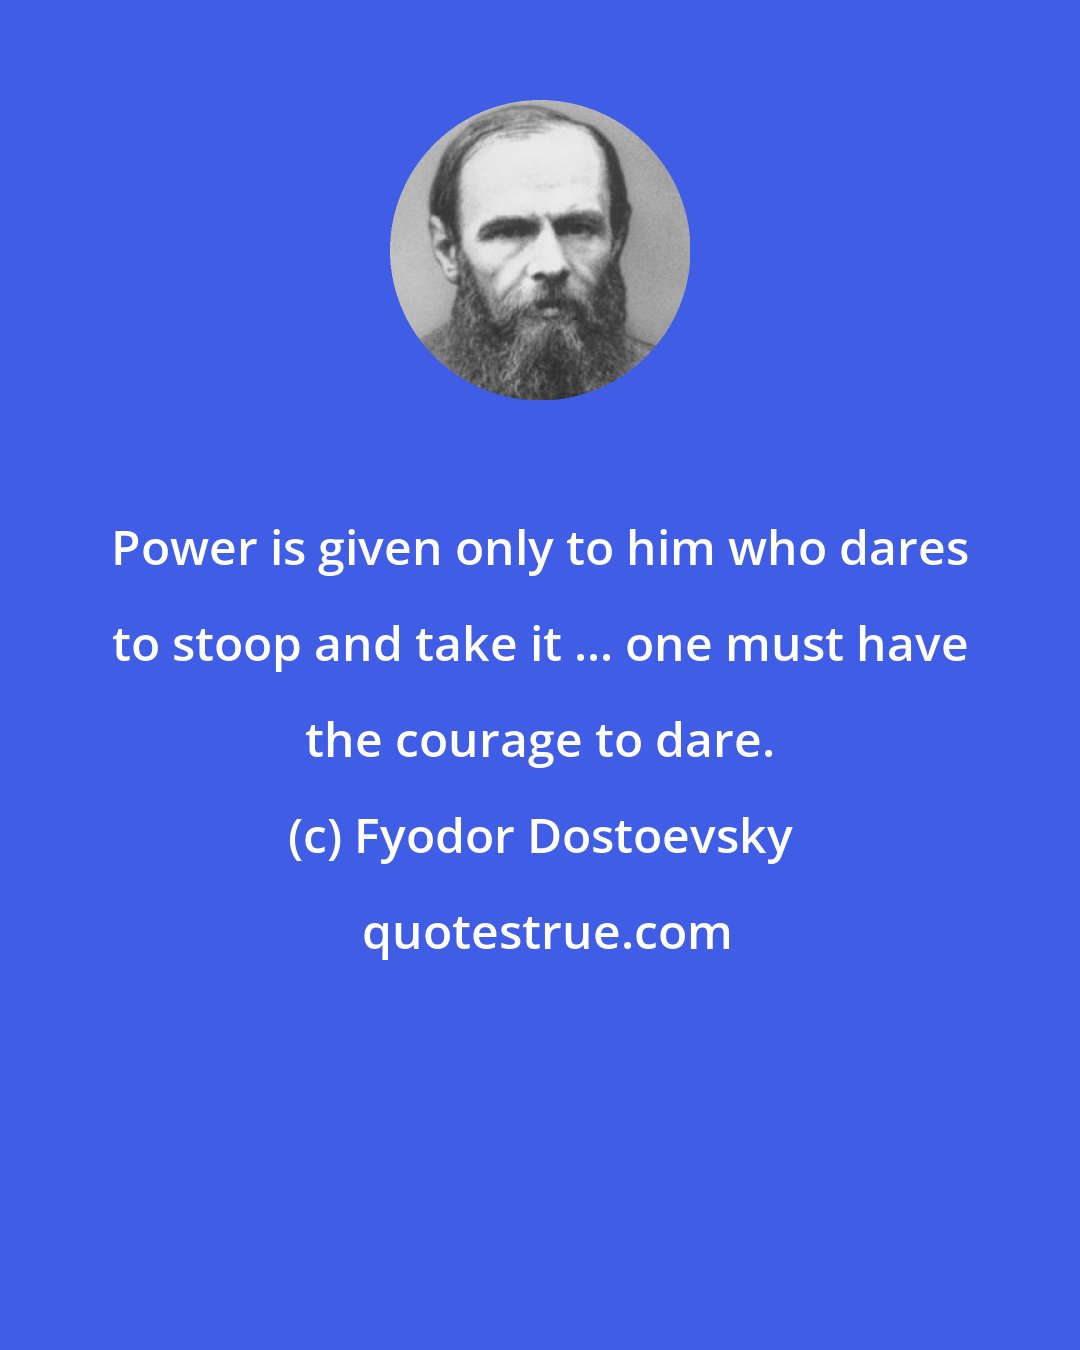 Fyodor Dostoevsky: Power is given only to him who dares to stoop and take it ... one must have the courage to dare.